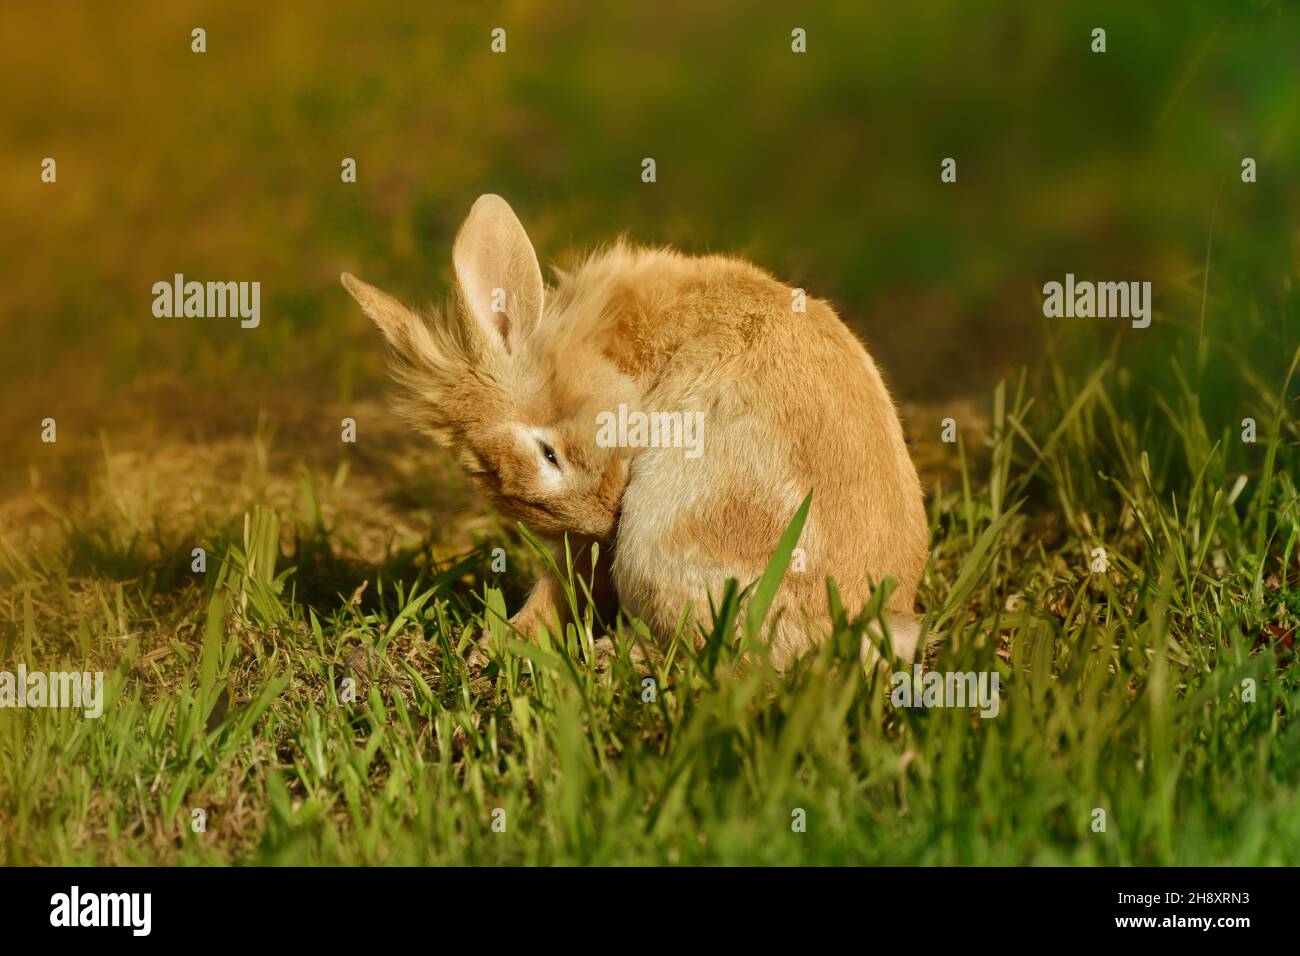 Brown Lionhead rabbit (Oryctolagus cuniculus f. domestica) on a meadow cleaning itself Stock Photo